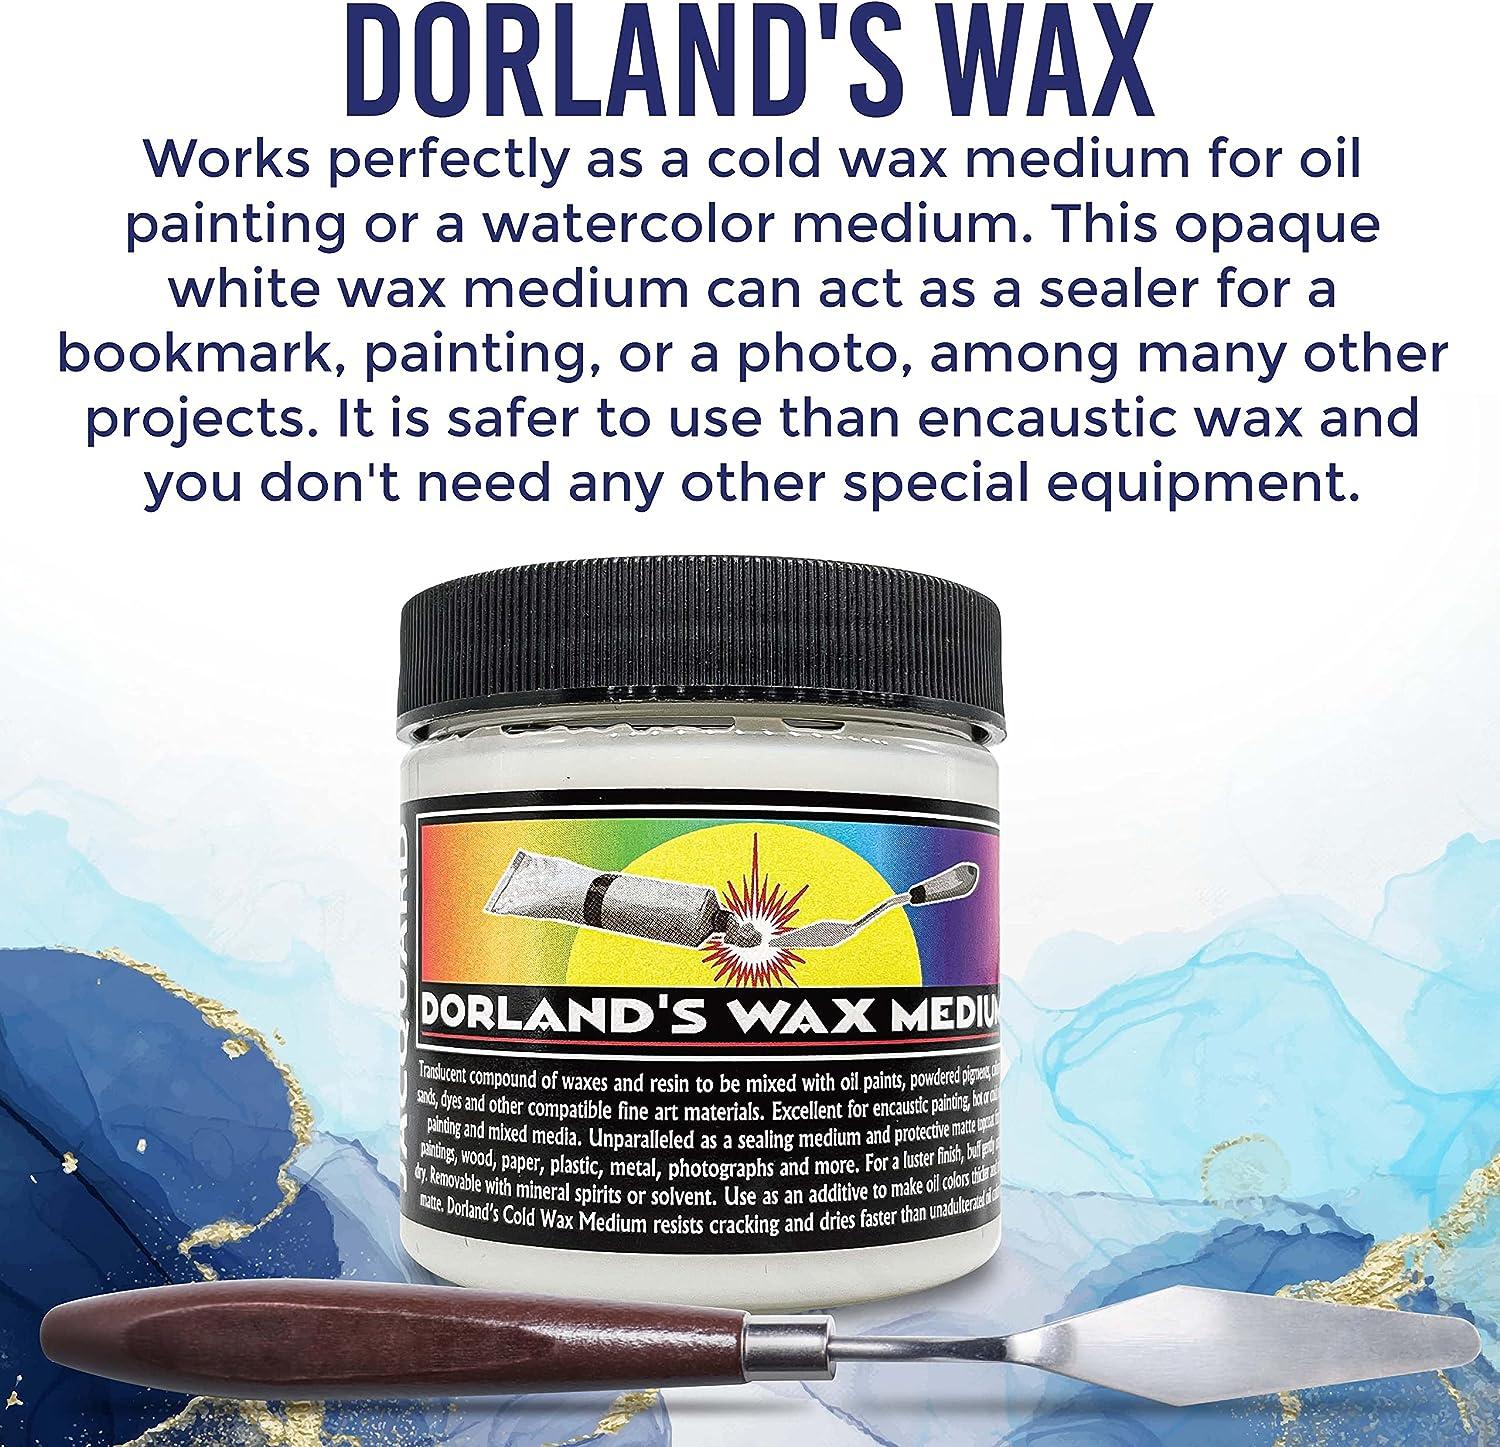 Jacquard Dorlands Wax 4fl oz - Cold Wax Medium Made in USA - Oil Painting -  Watercolor Sealer - Bundled with Moshify Palette Knife